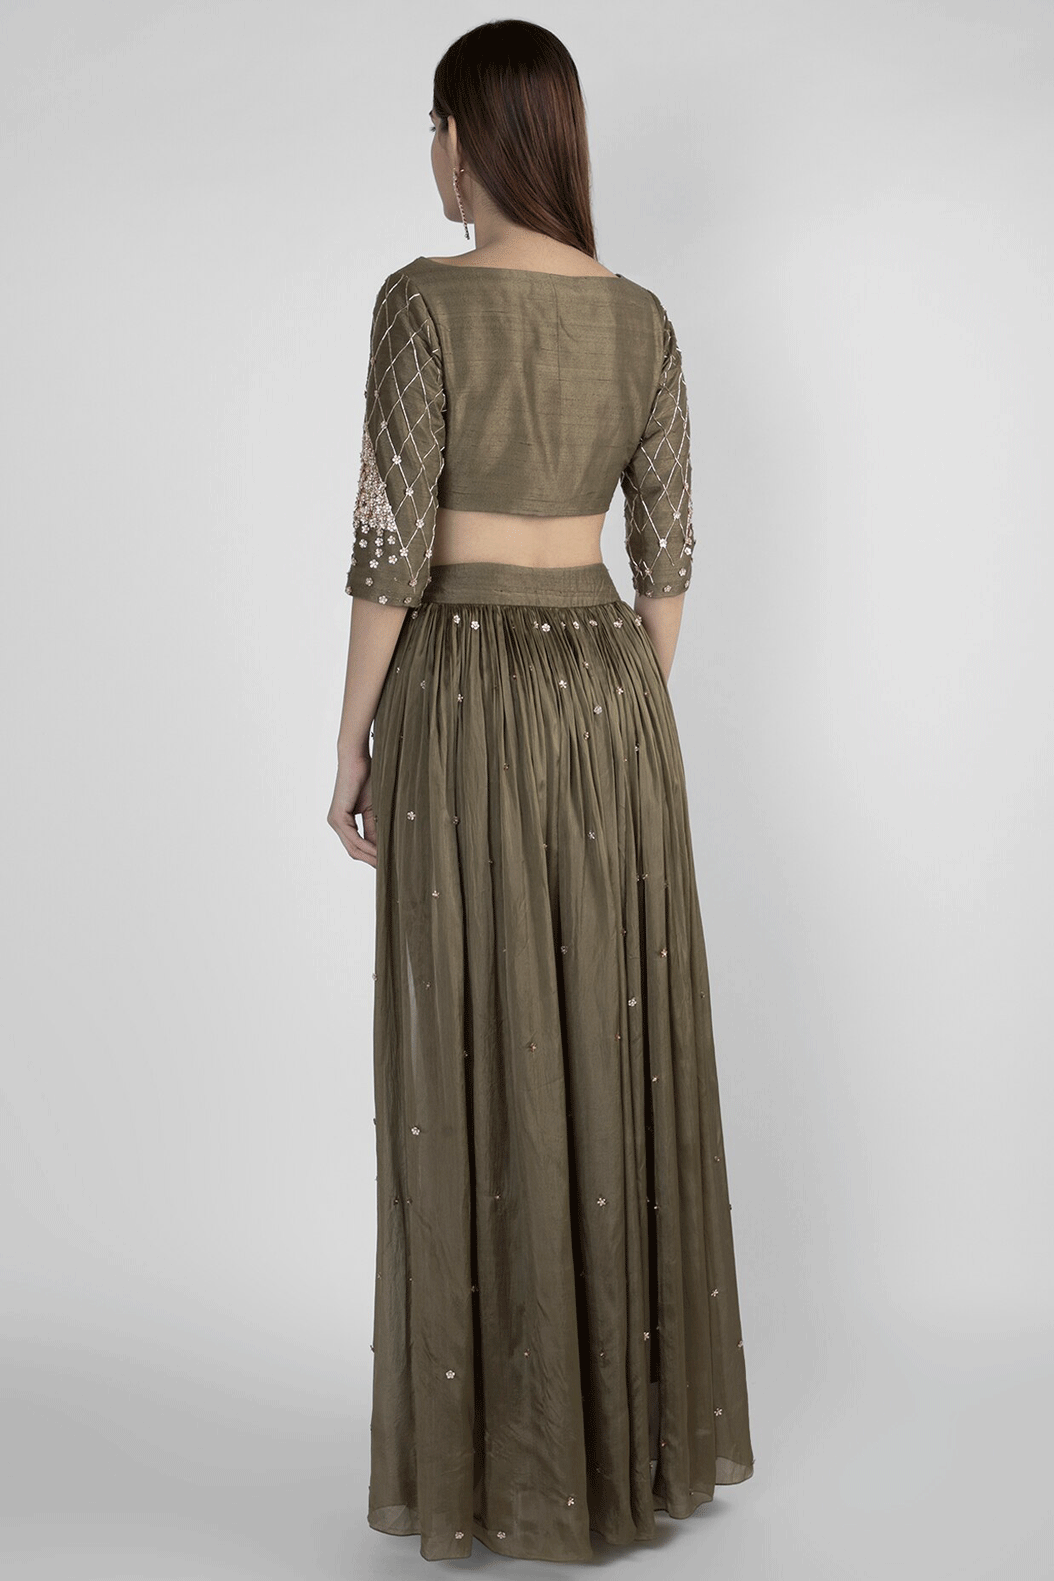 Olive Green Embroidered Crop Top With Pant Skirt